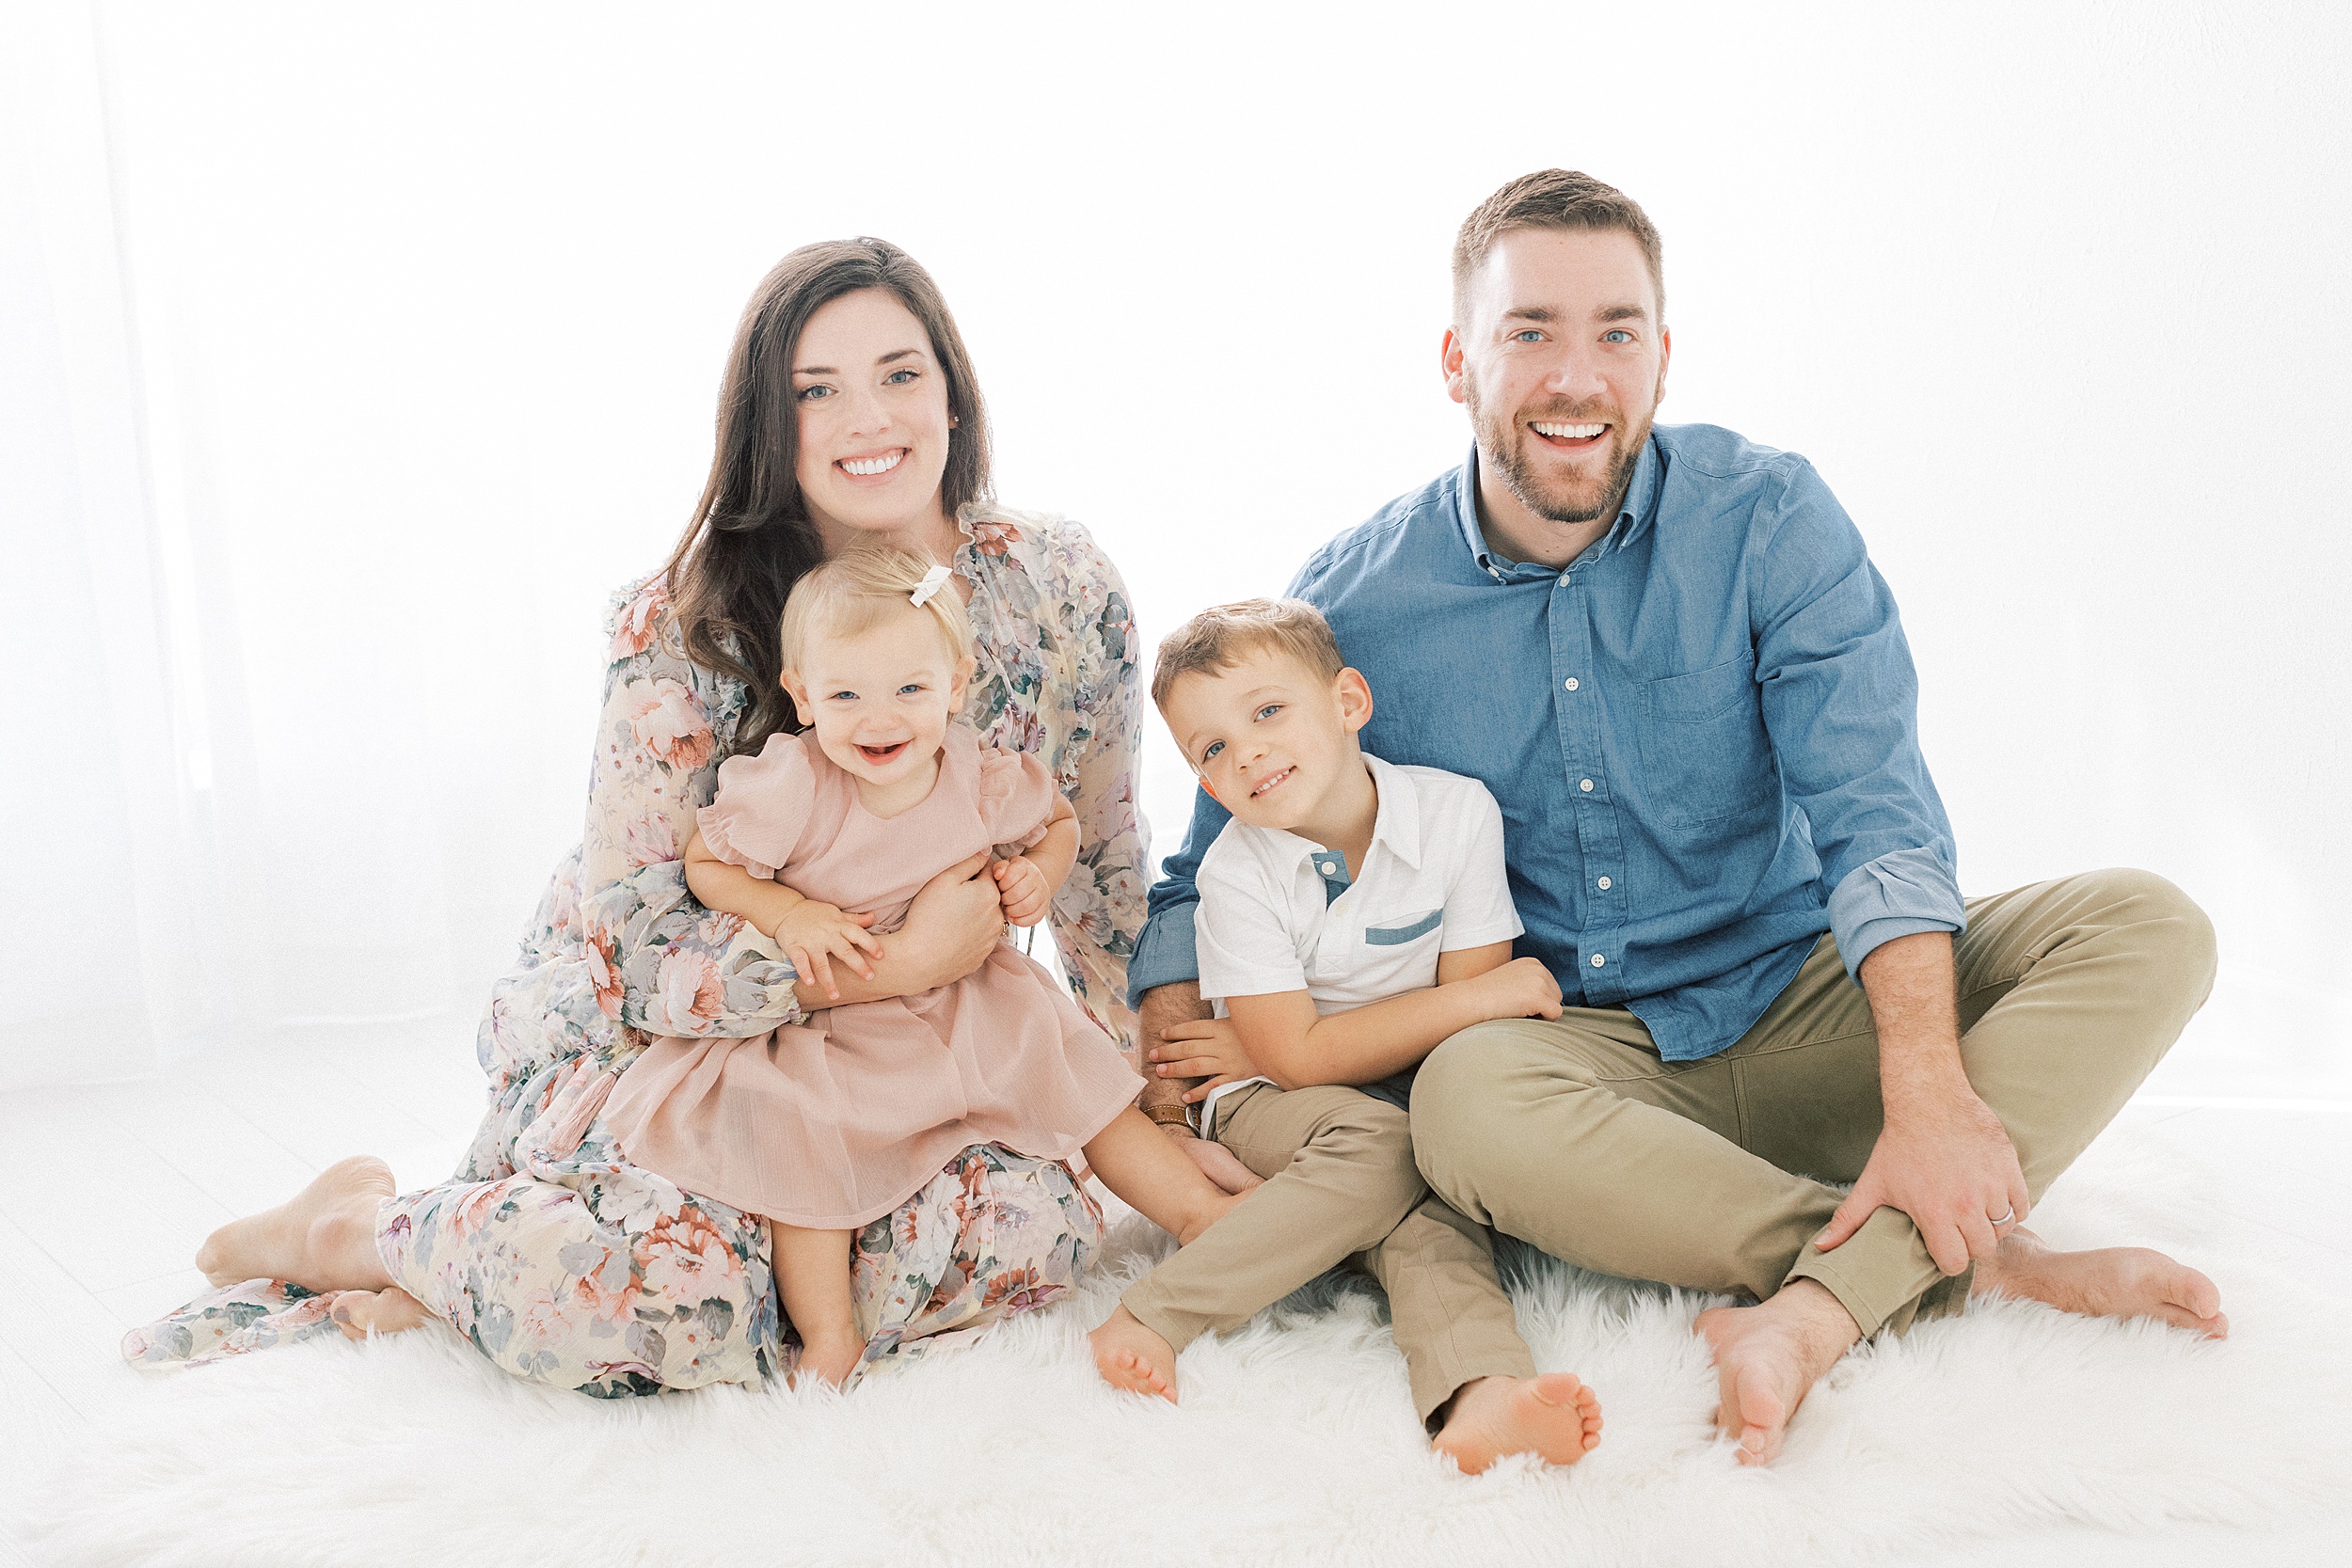 A mom and dad sit on the floor of a studio with their toddler son and daughter in their laps